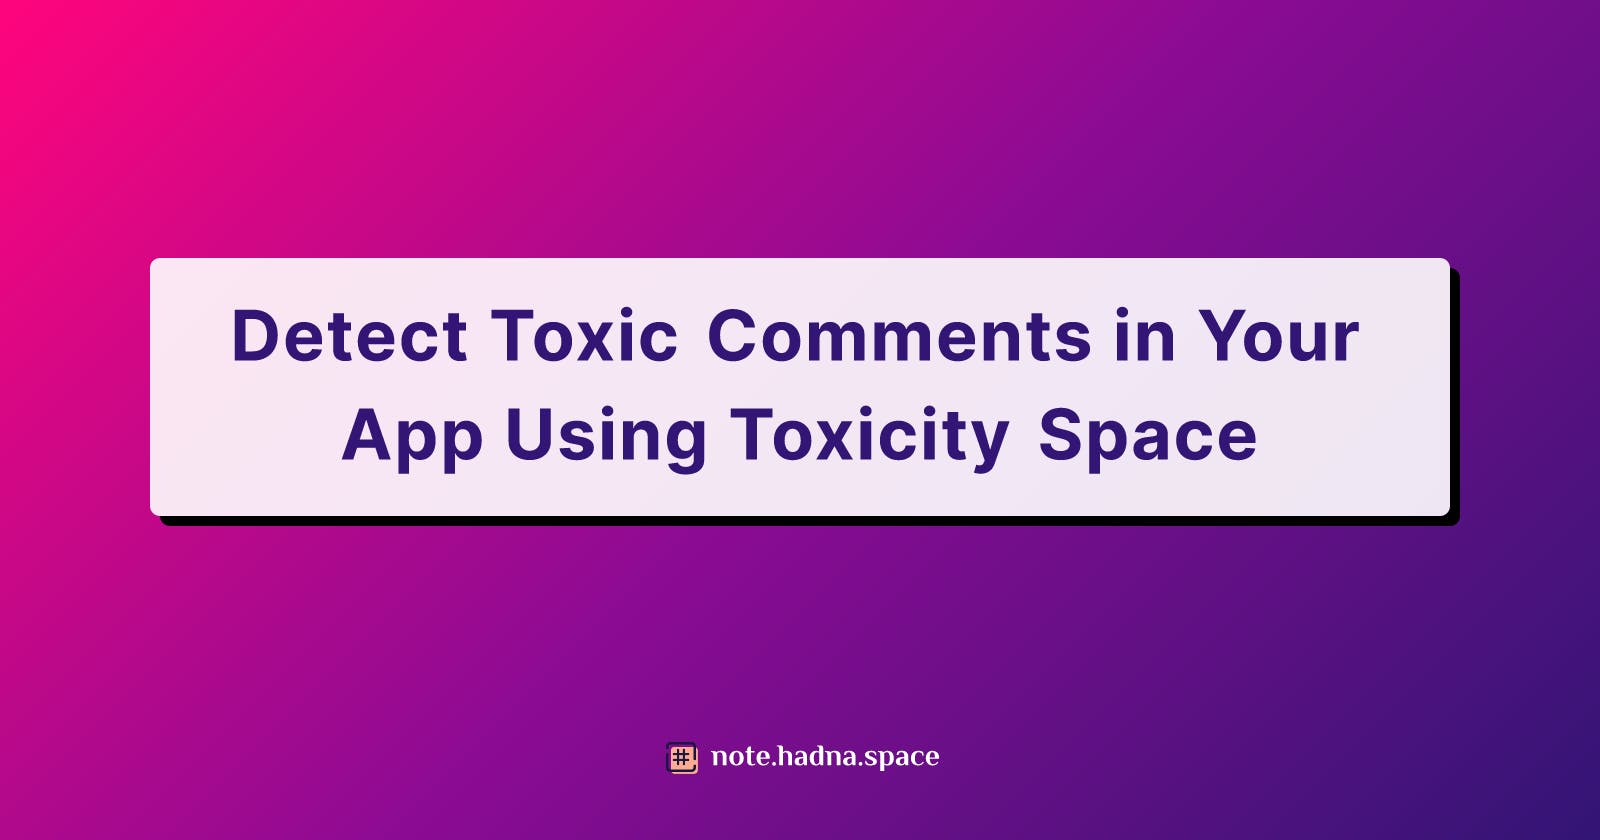 Detect Toxic Comments in Your App Using Toxicity Space